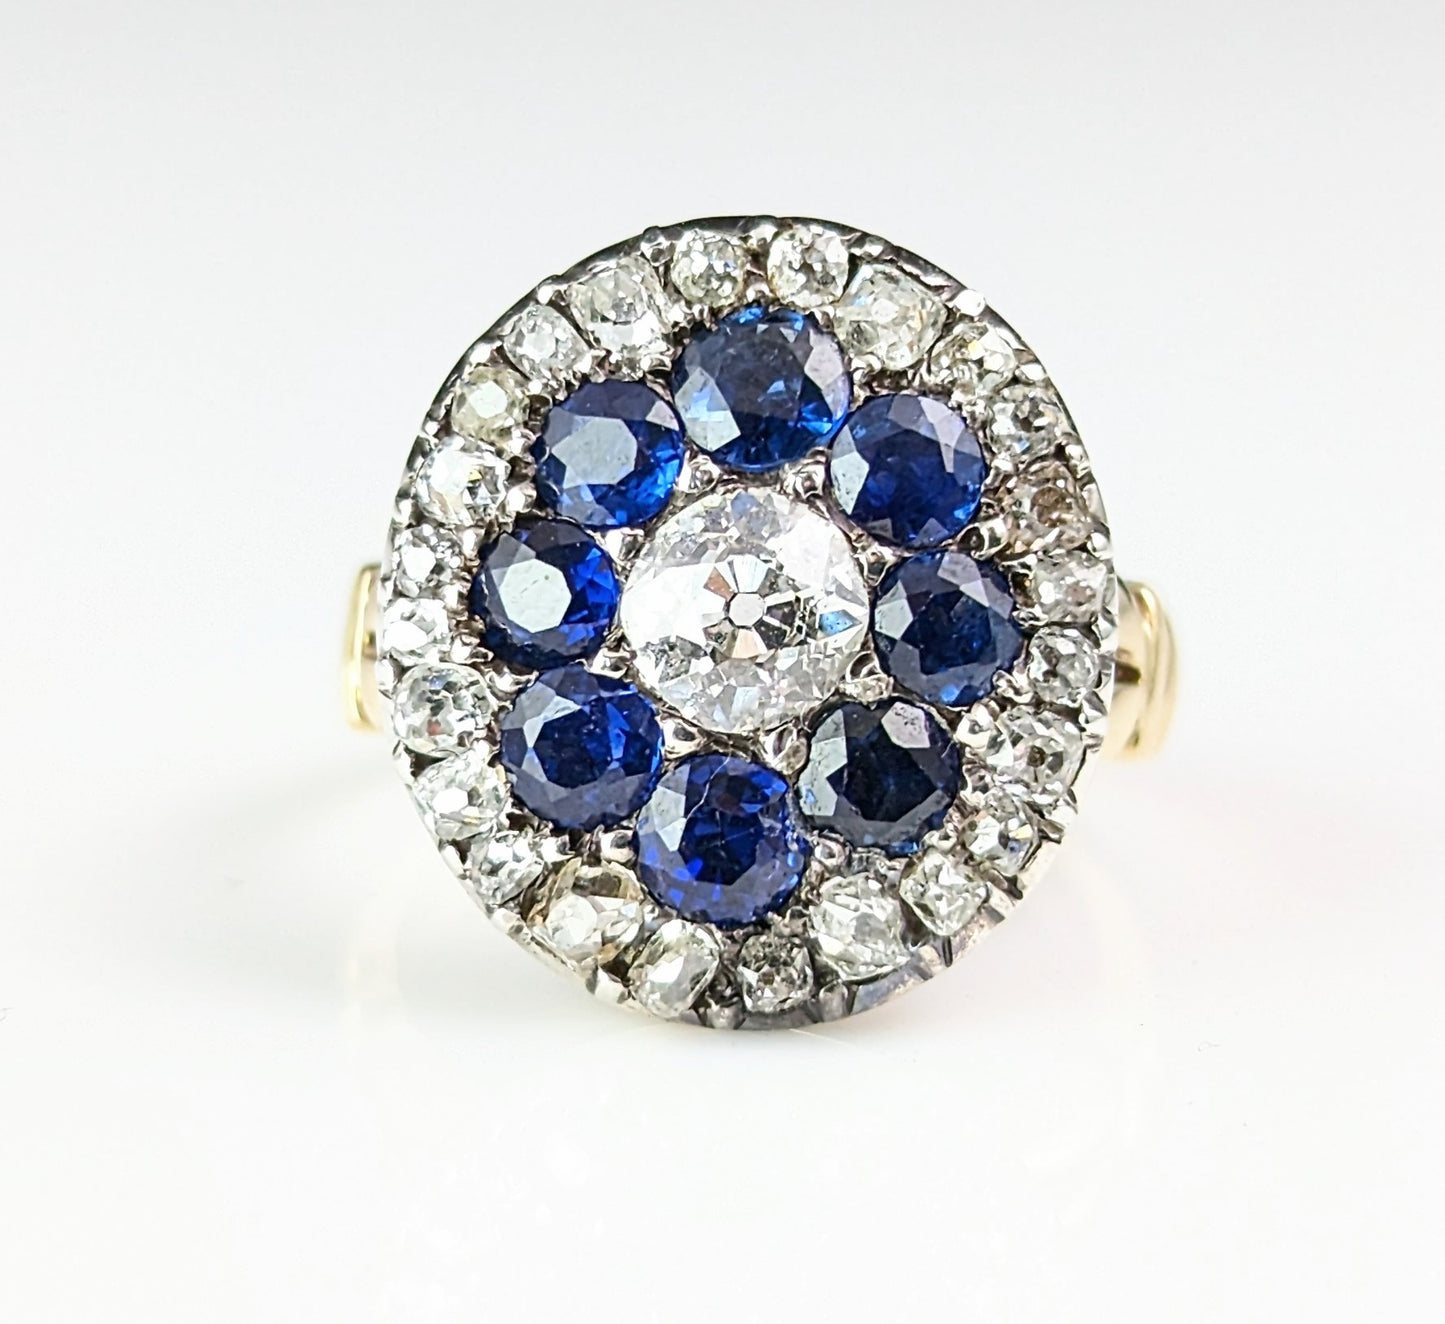 Antique Sapphire and Diamond halo cluster ring, 9ct gold and sterling silver